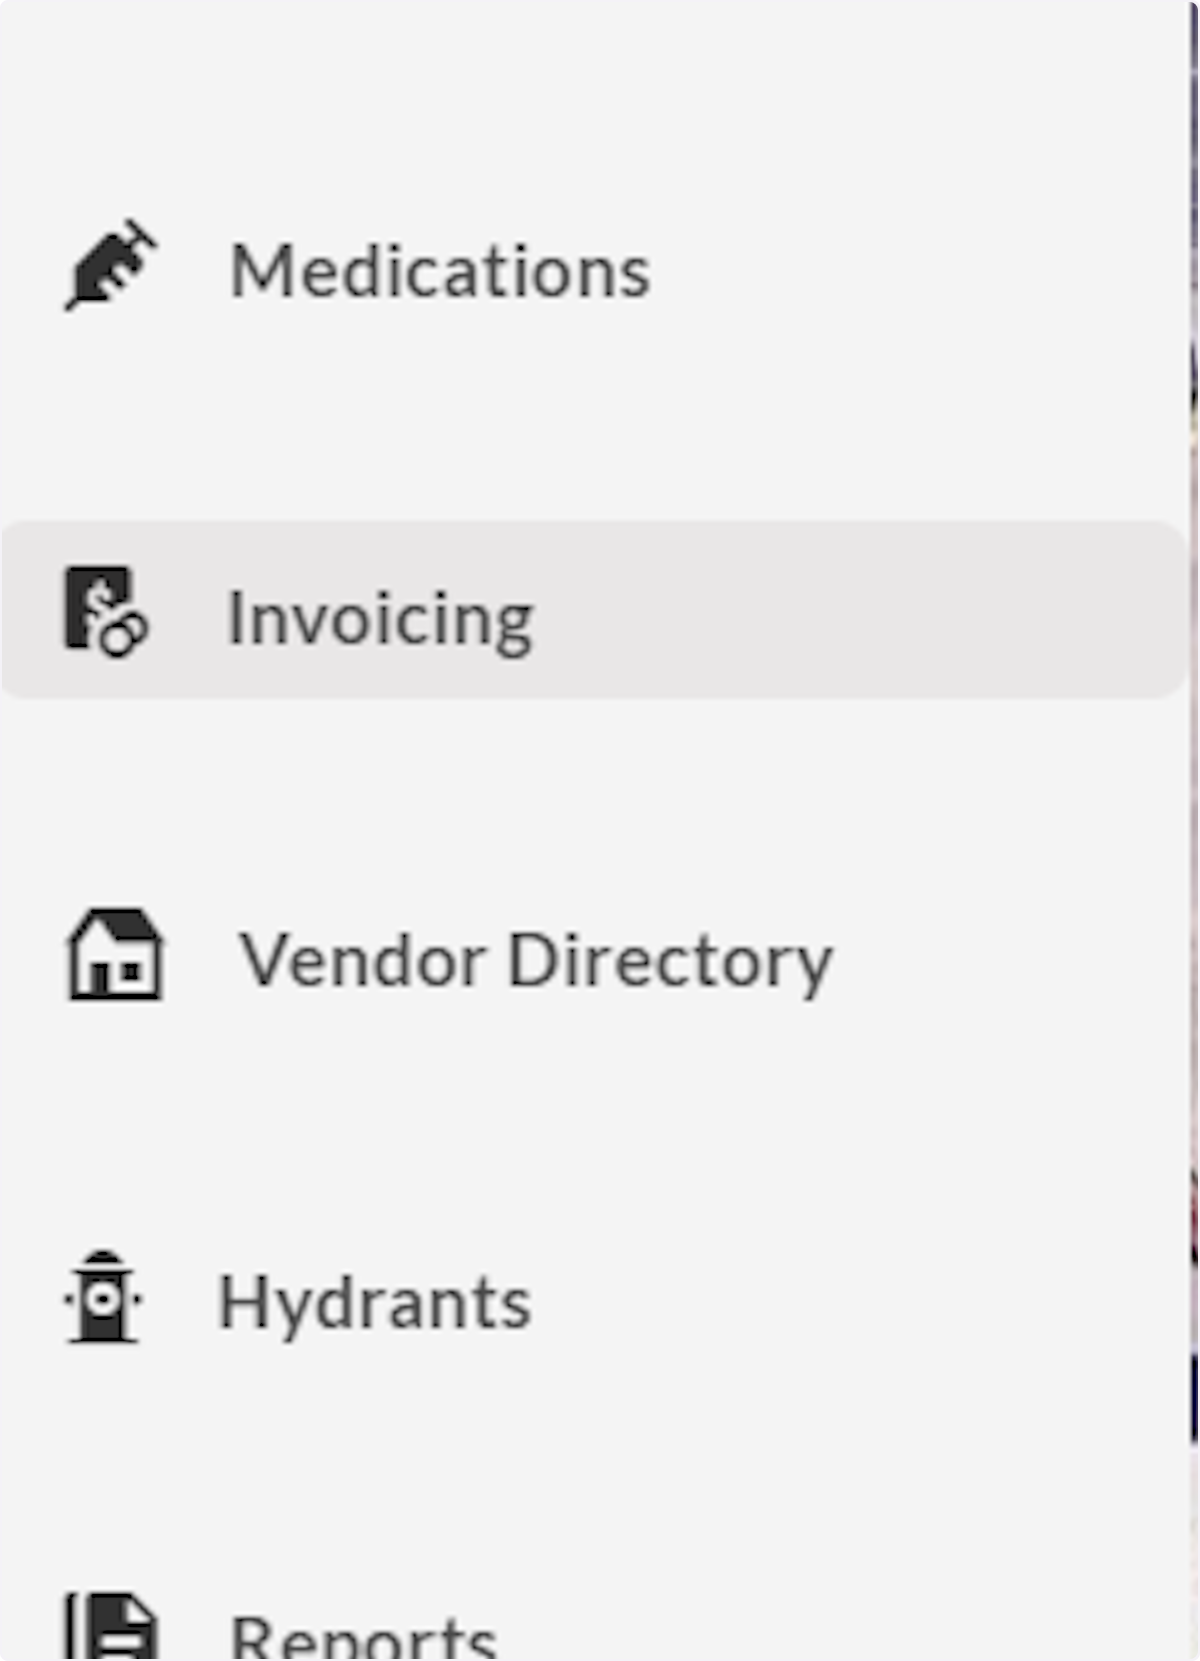 Click on Invoicing.